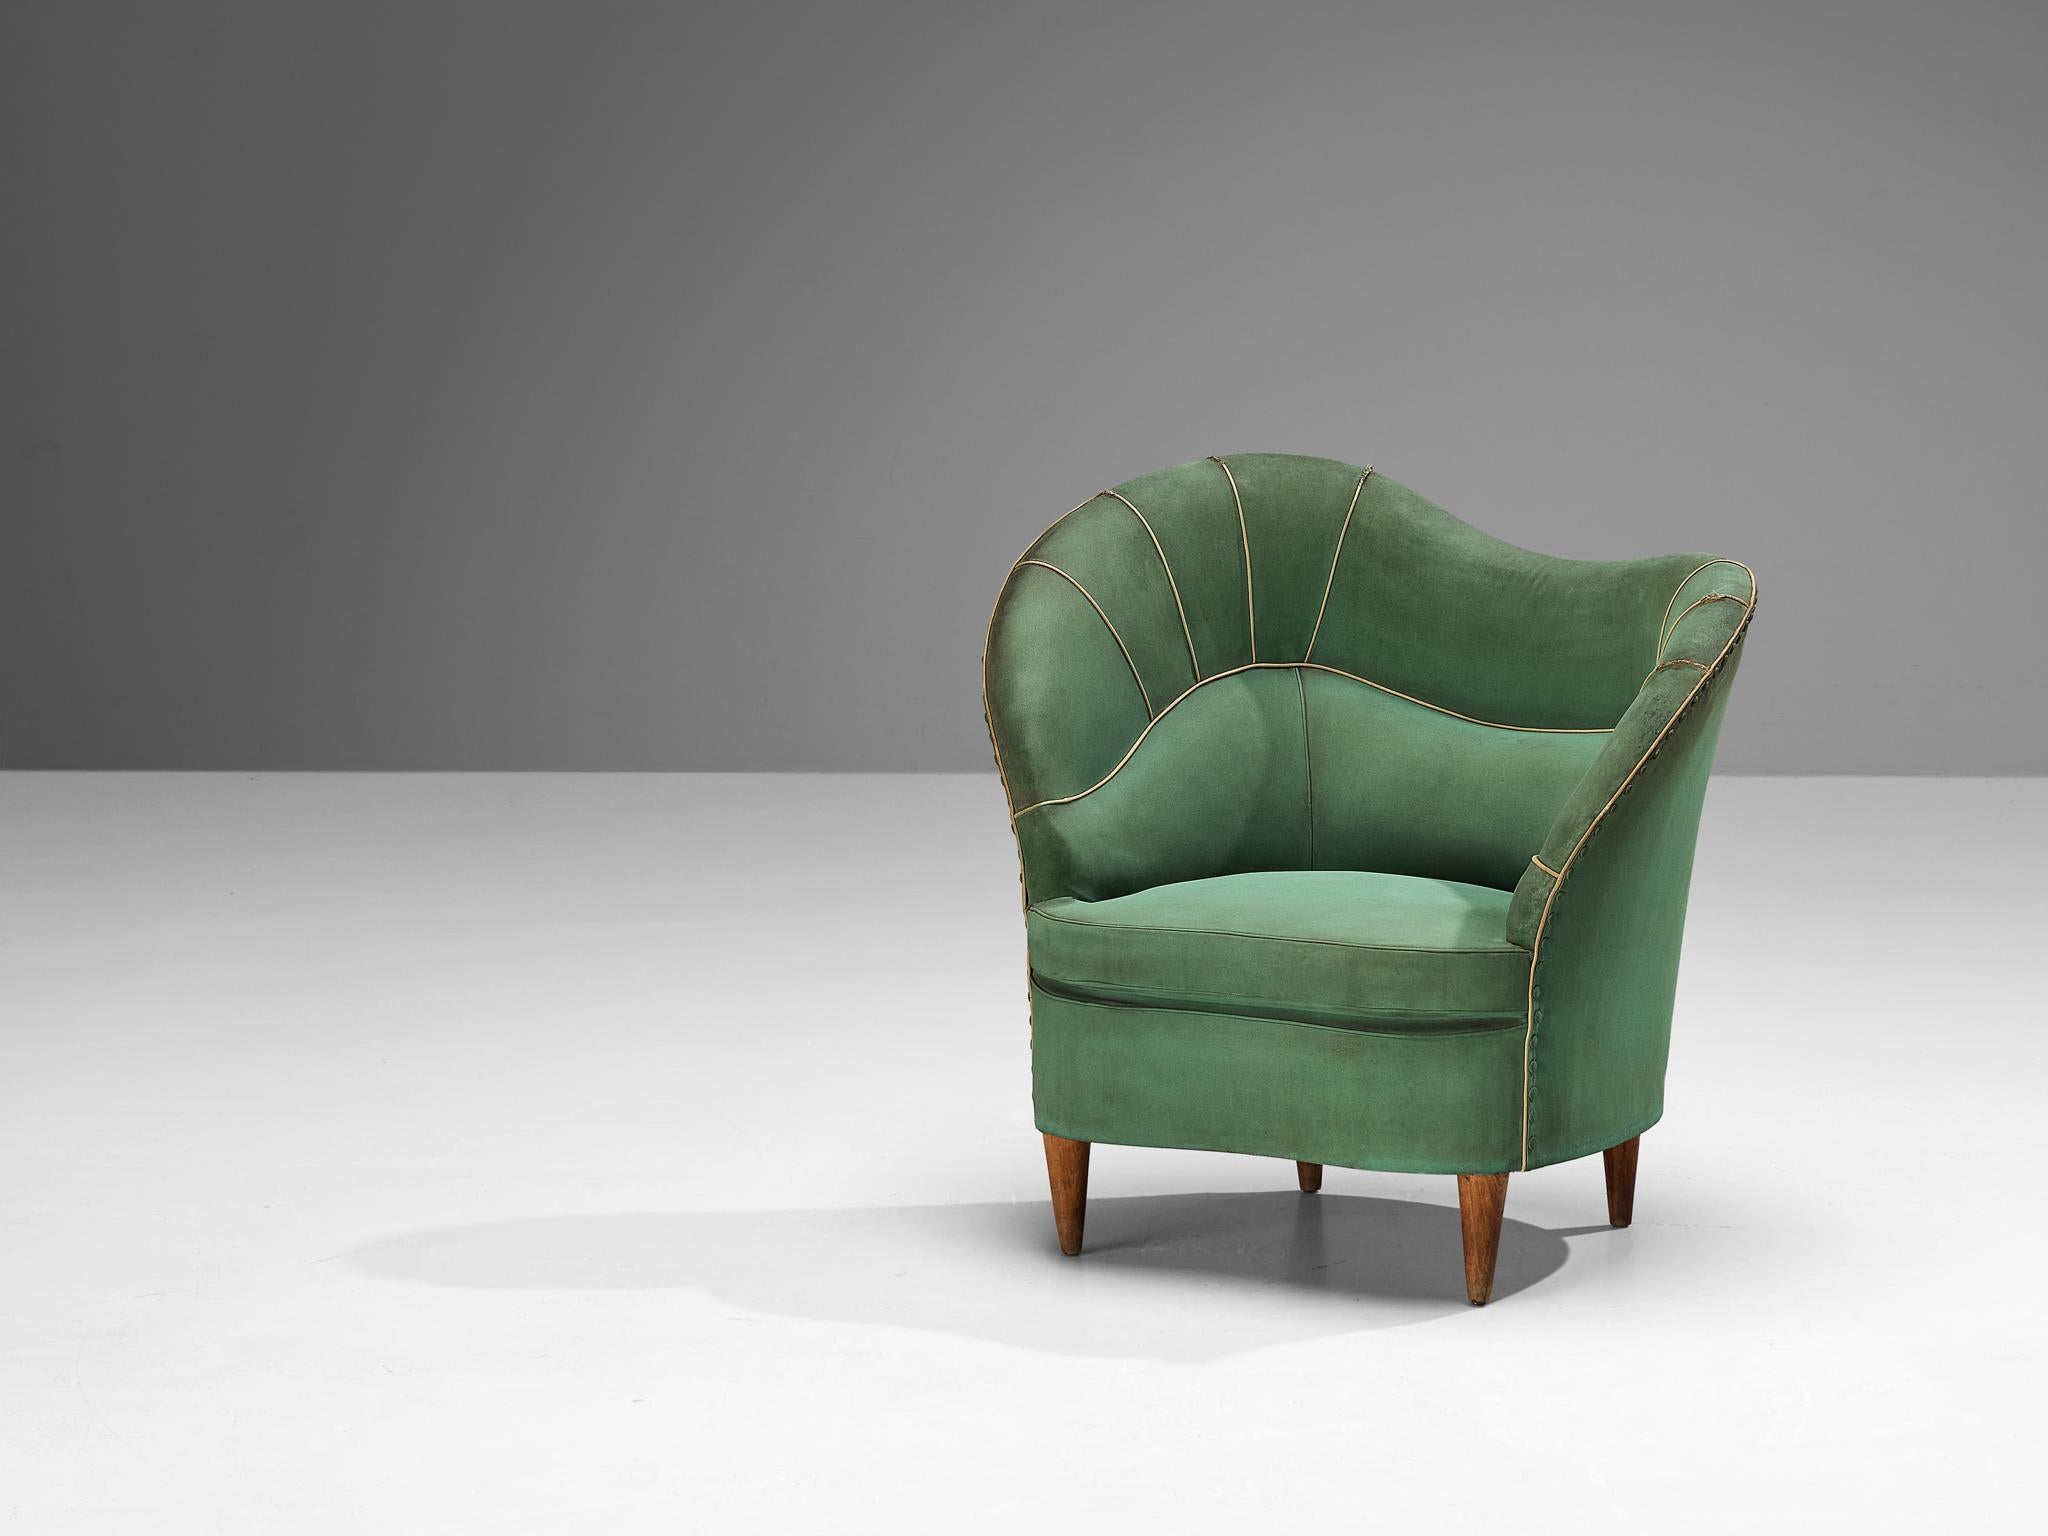 Andrea Busiri Vici, armchair, faux leather, beech, Italy, 1950s

This charming chair stands as a rare creation from the Italian architect and designer Andrea Busiri Vici (1903-1989). Beloning to a family with a history of architects, his elder